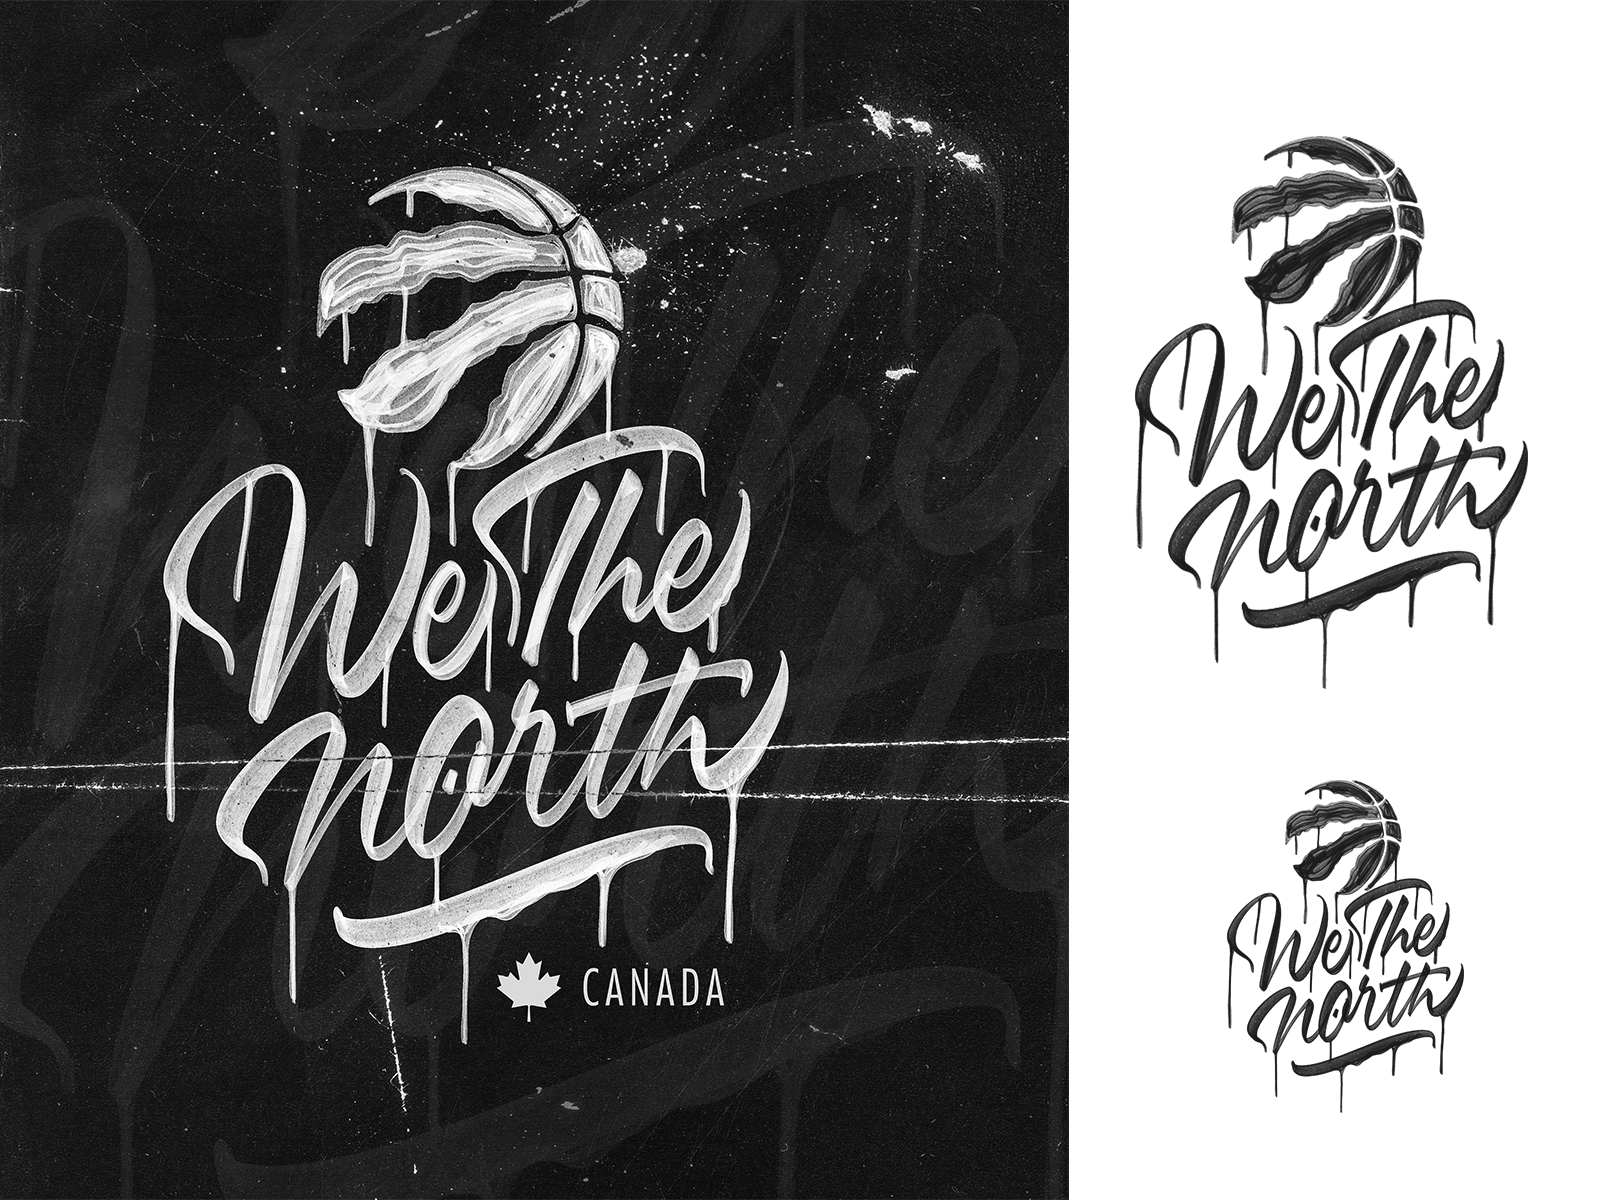 #WeTheNorth: Fans are celebrating victory through art - #WeTheChampions